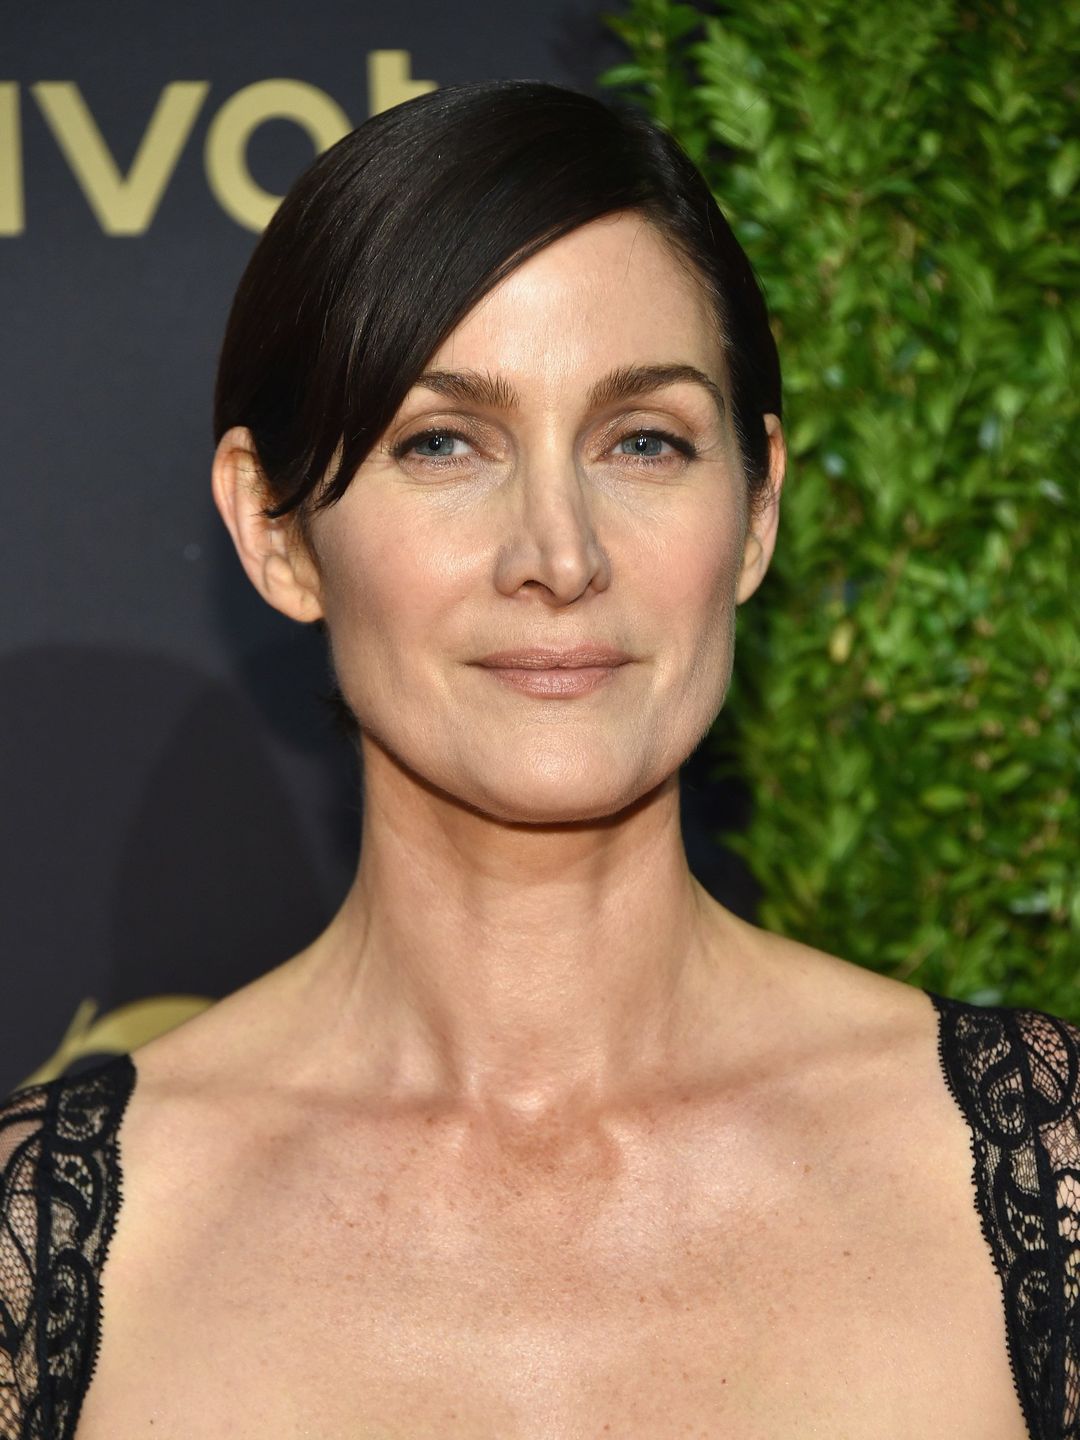 Carrie-Anne Moss in real life